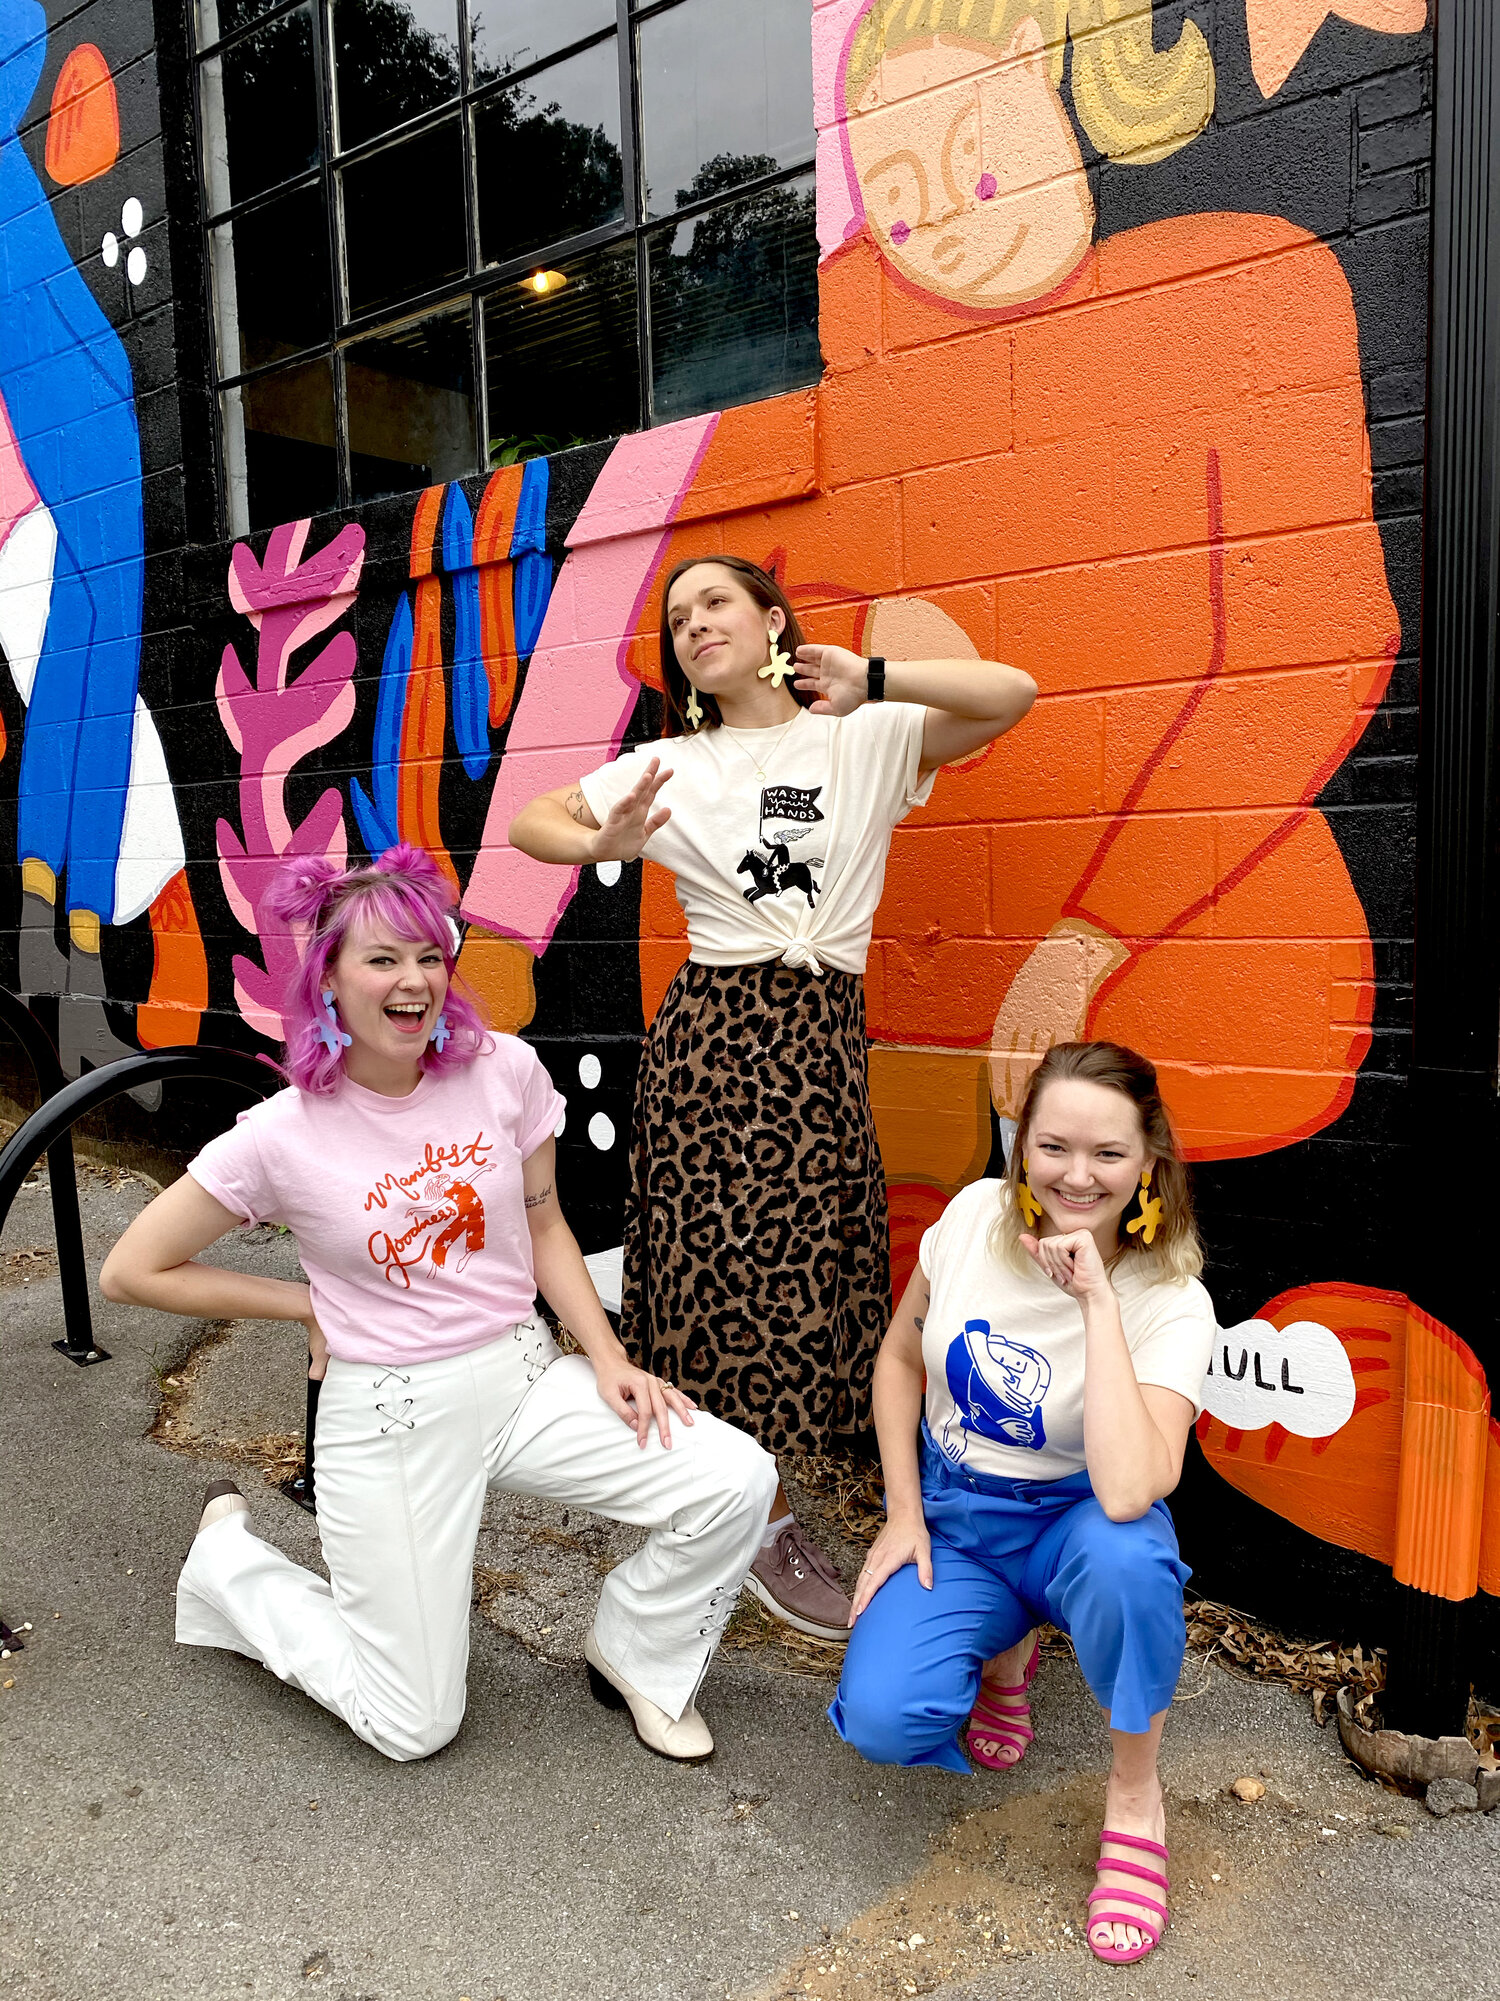 (Left to Right) Shelby of Cold Gold, Paris Woodhull, and Alaina of Cold Gold pose in front of Paris’ mural, all wearing Cold Gold Point Move Earrings and Paris Woodhull t-shirts.